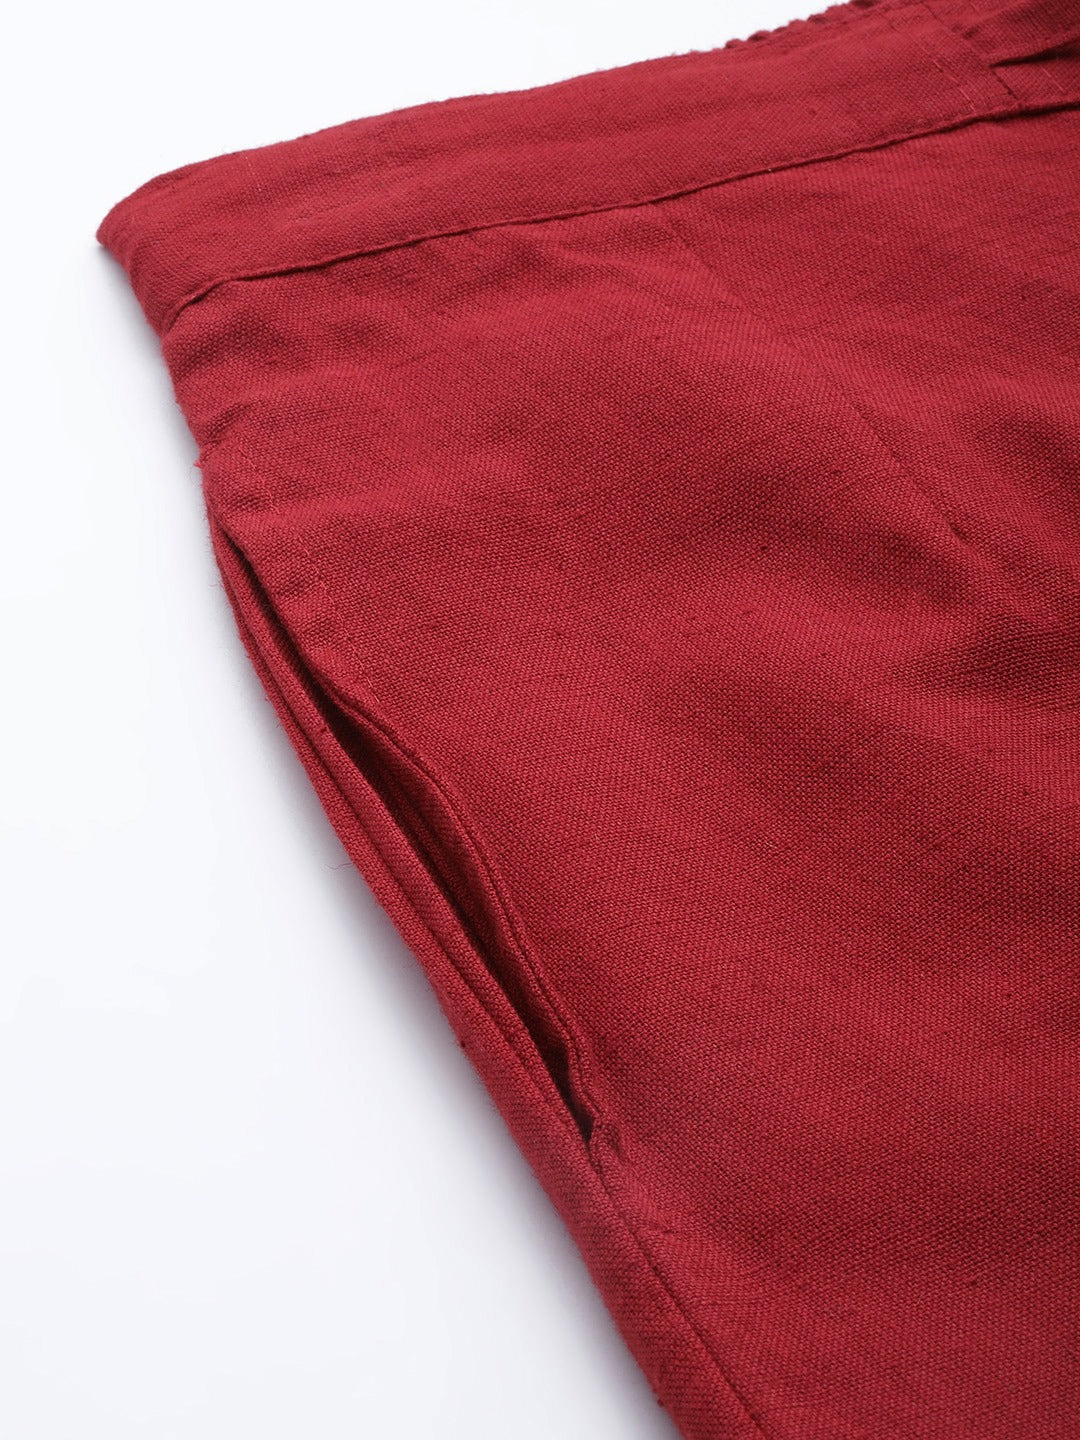 Solid Maroon Cotton Trousers-Yufta Store-4206PNTMRS